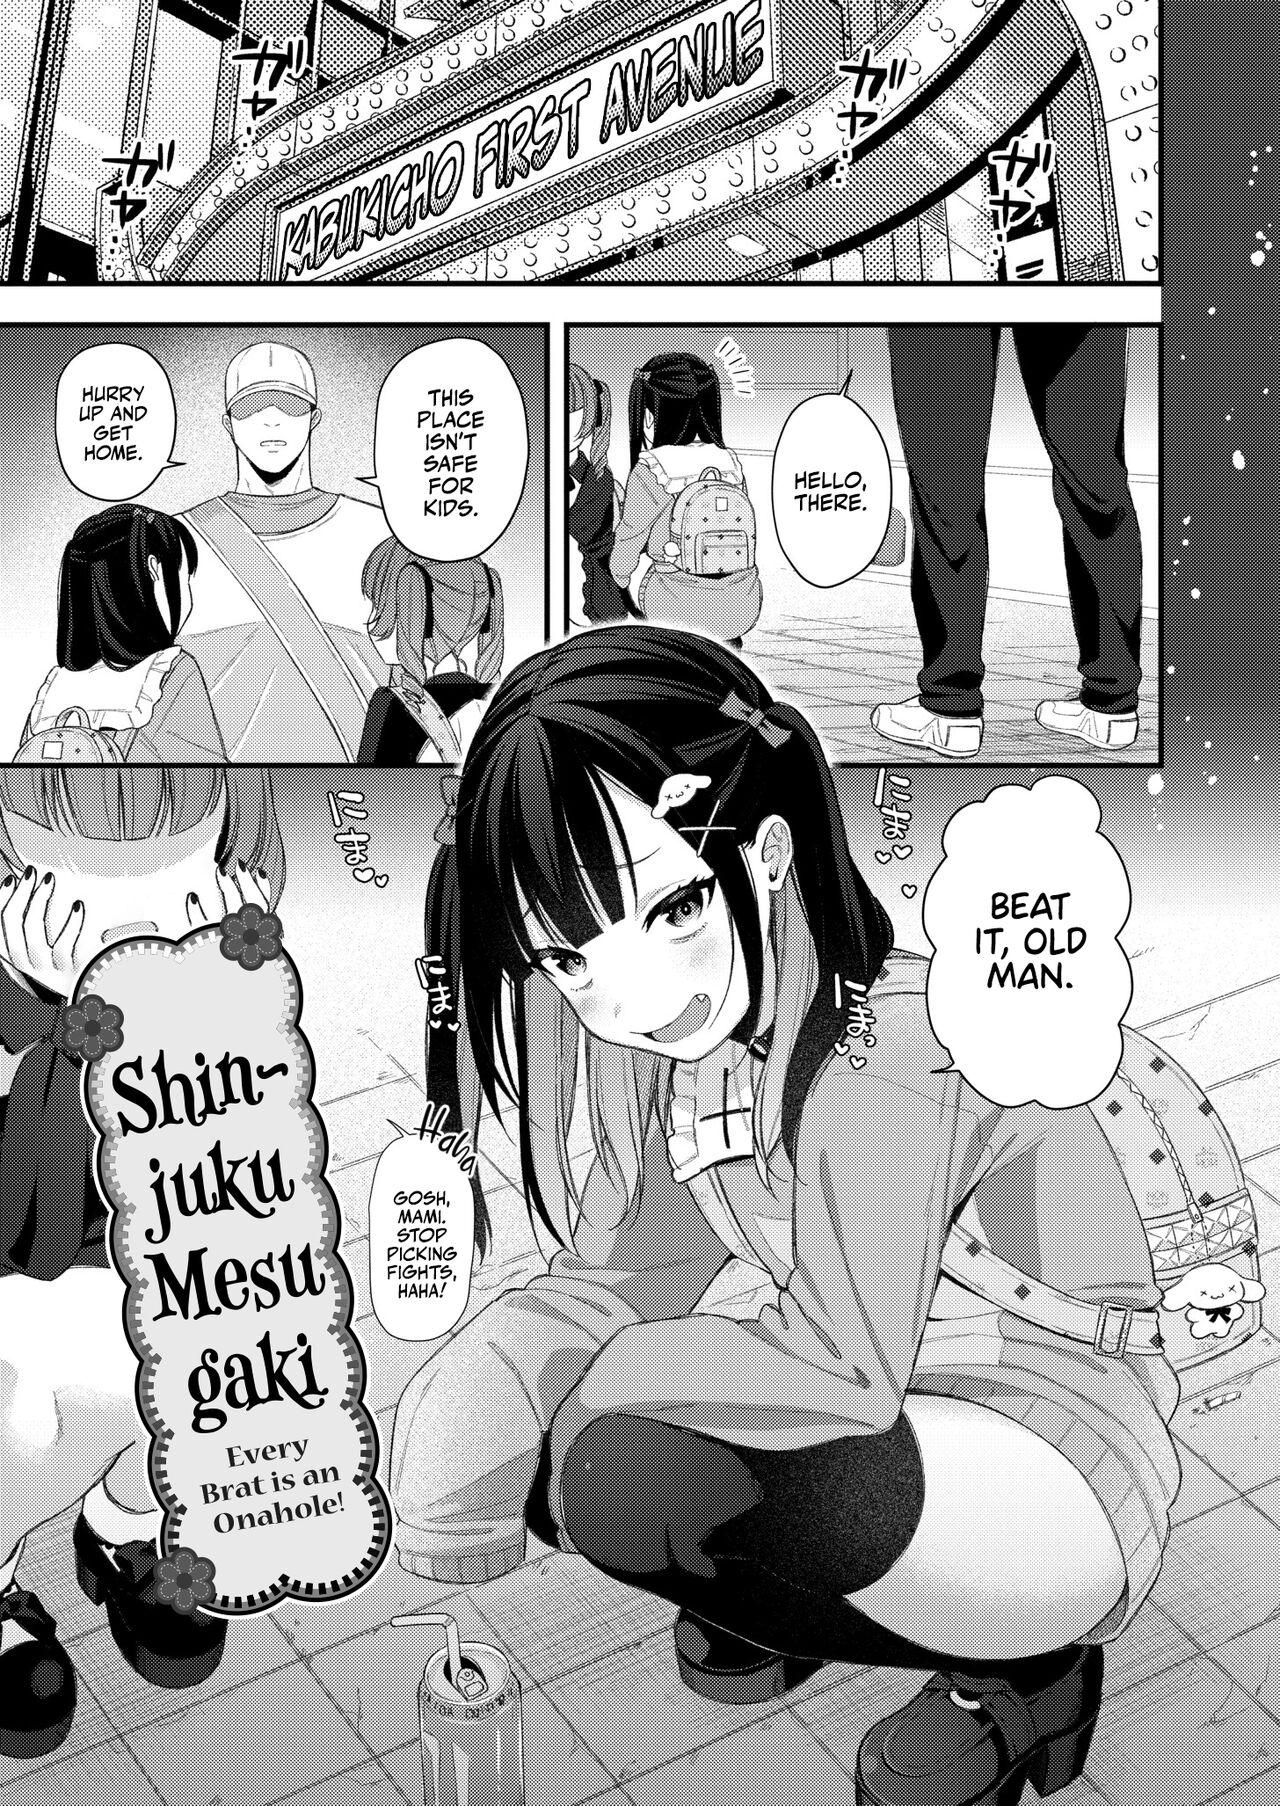 Small Tits Mesugaki, choro sugi w | Fucking Brats Is Way Too Easy Chapter 01 Perfect Teen - Picture 3